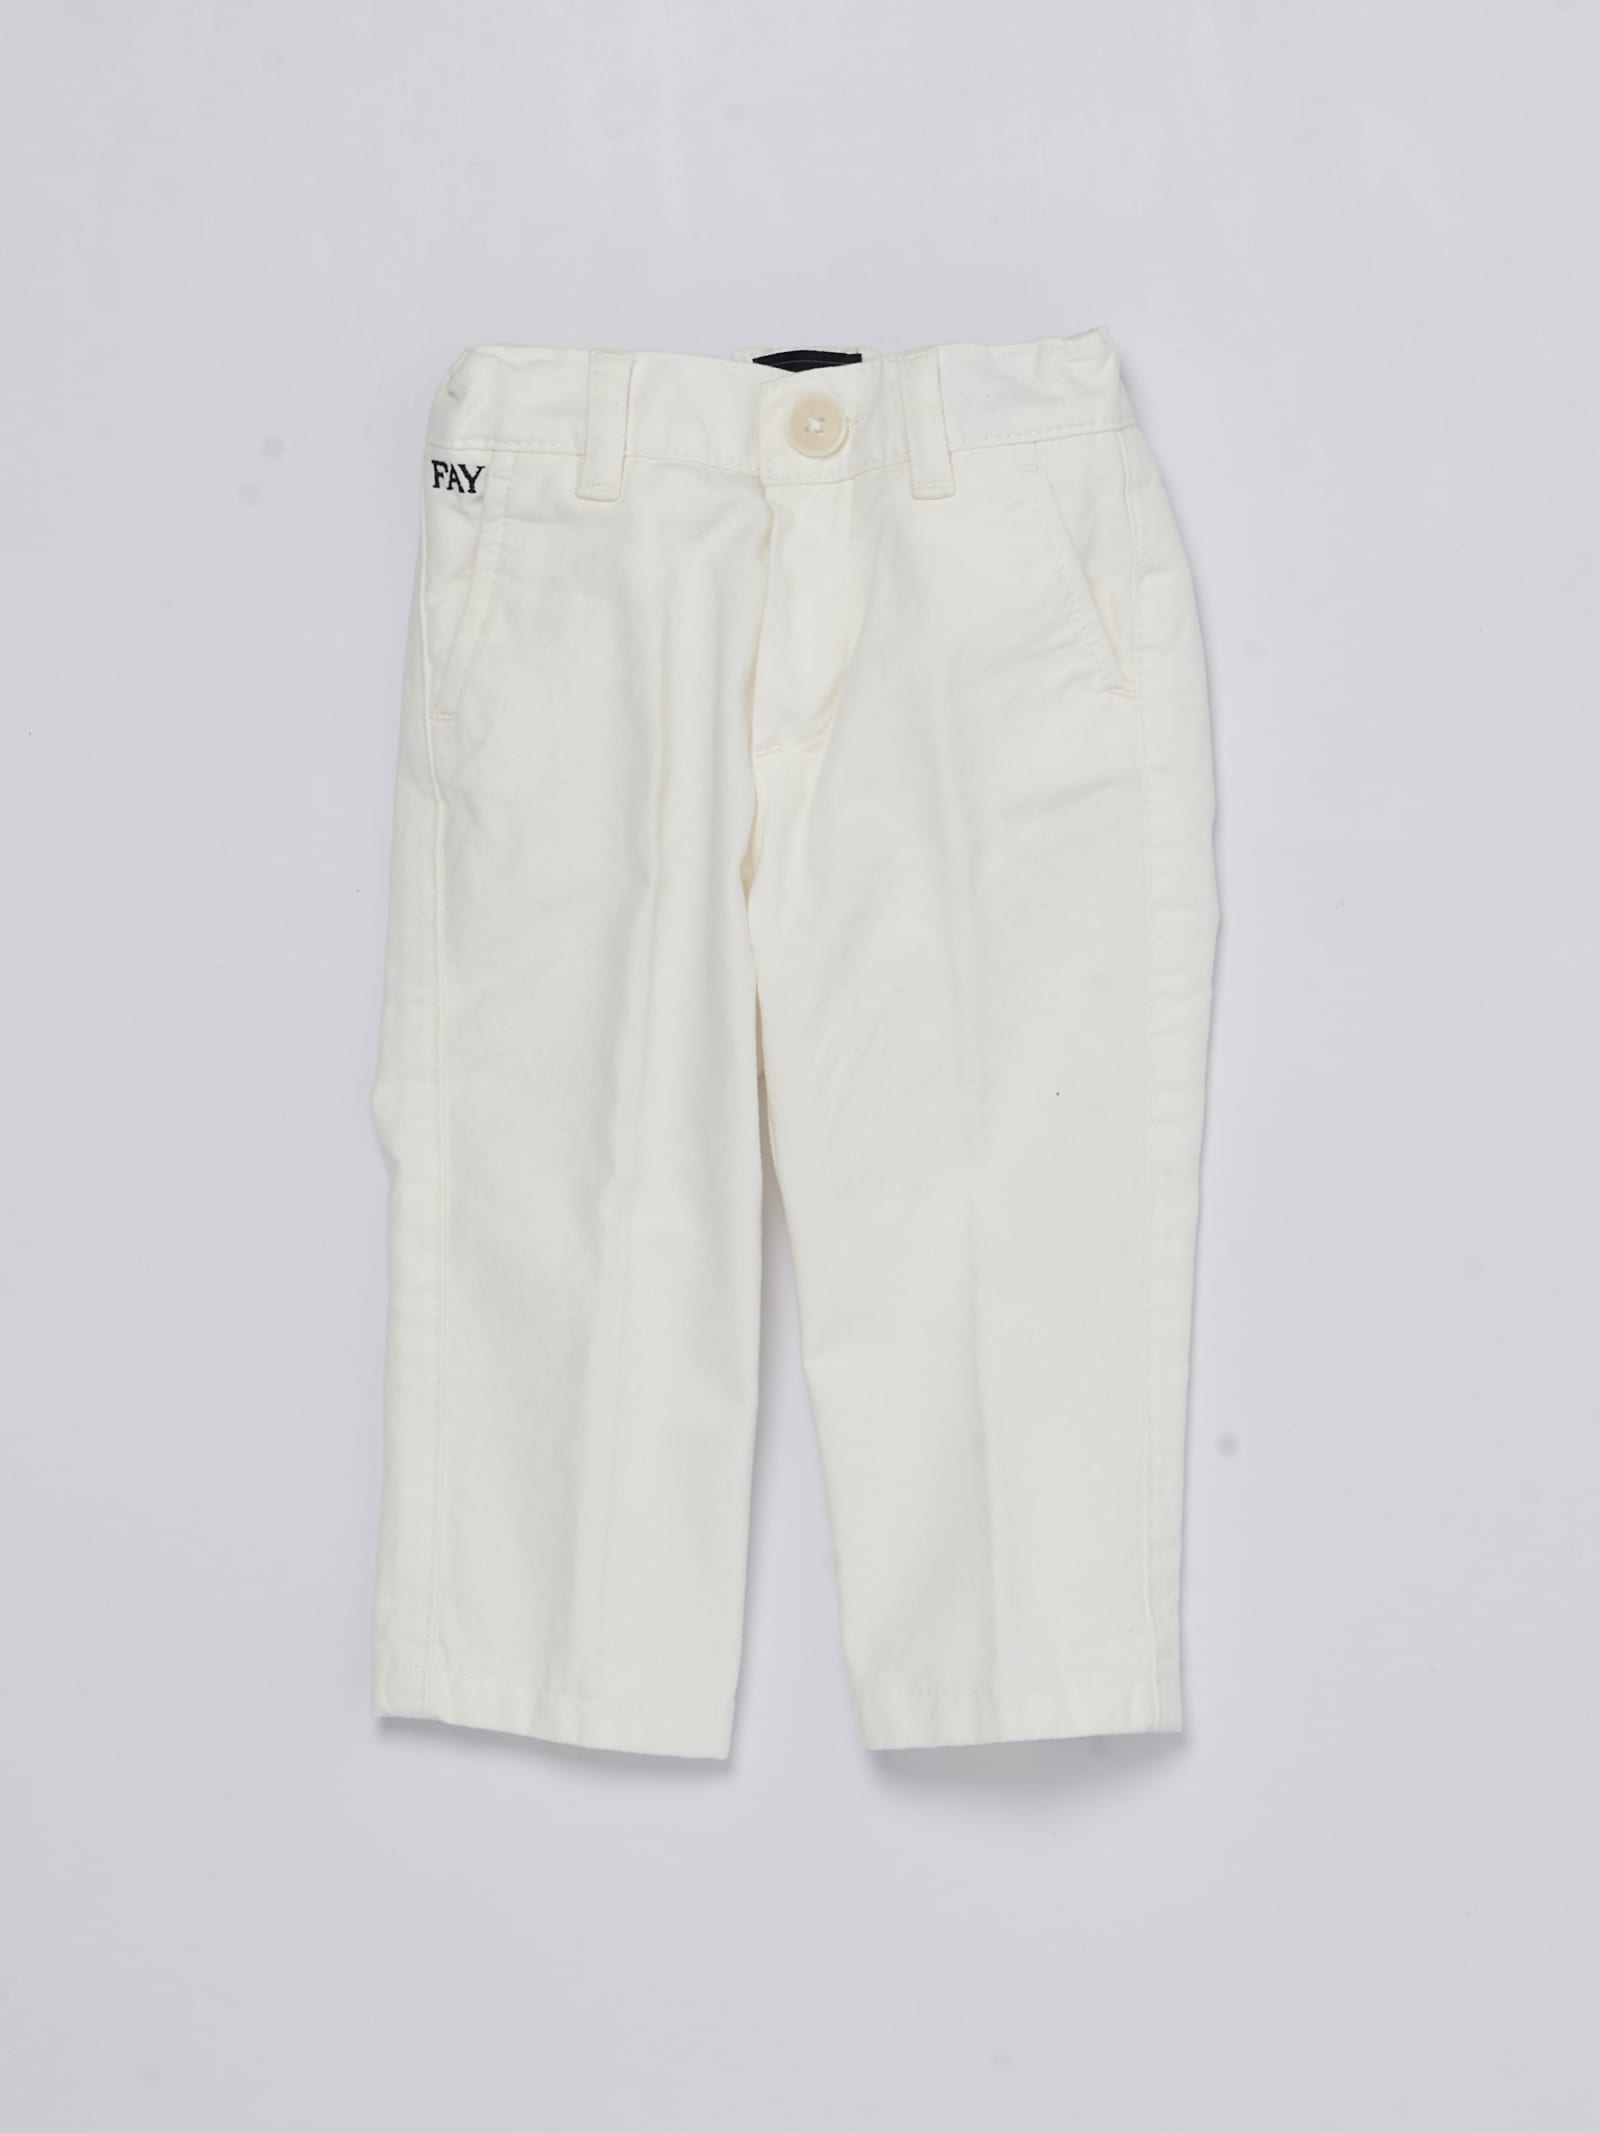 Fay Babies' Trousers Trousers In Avorio